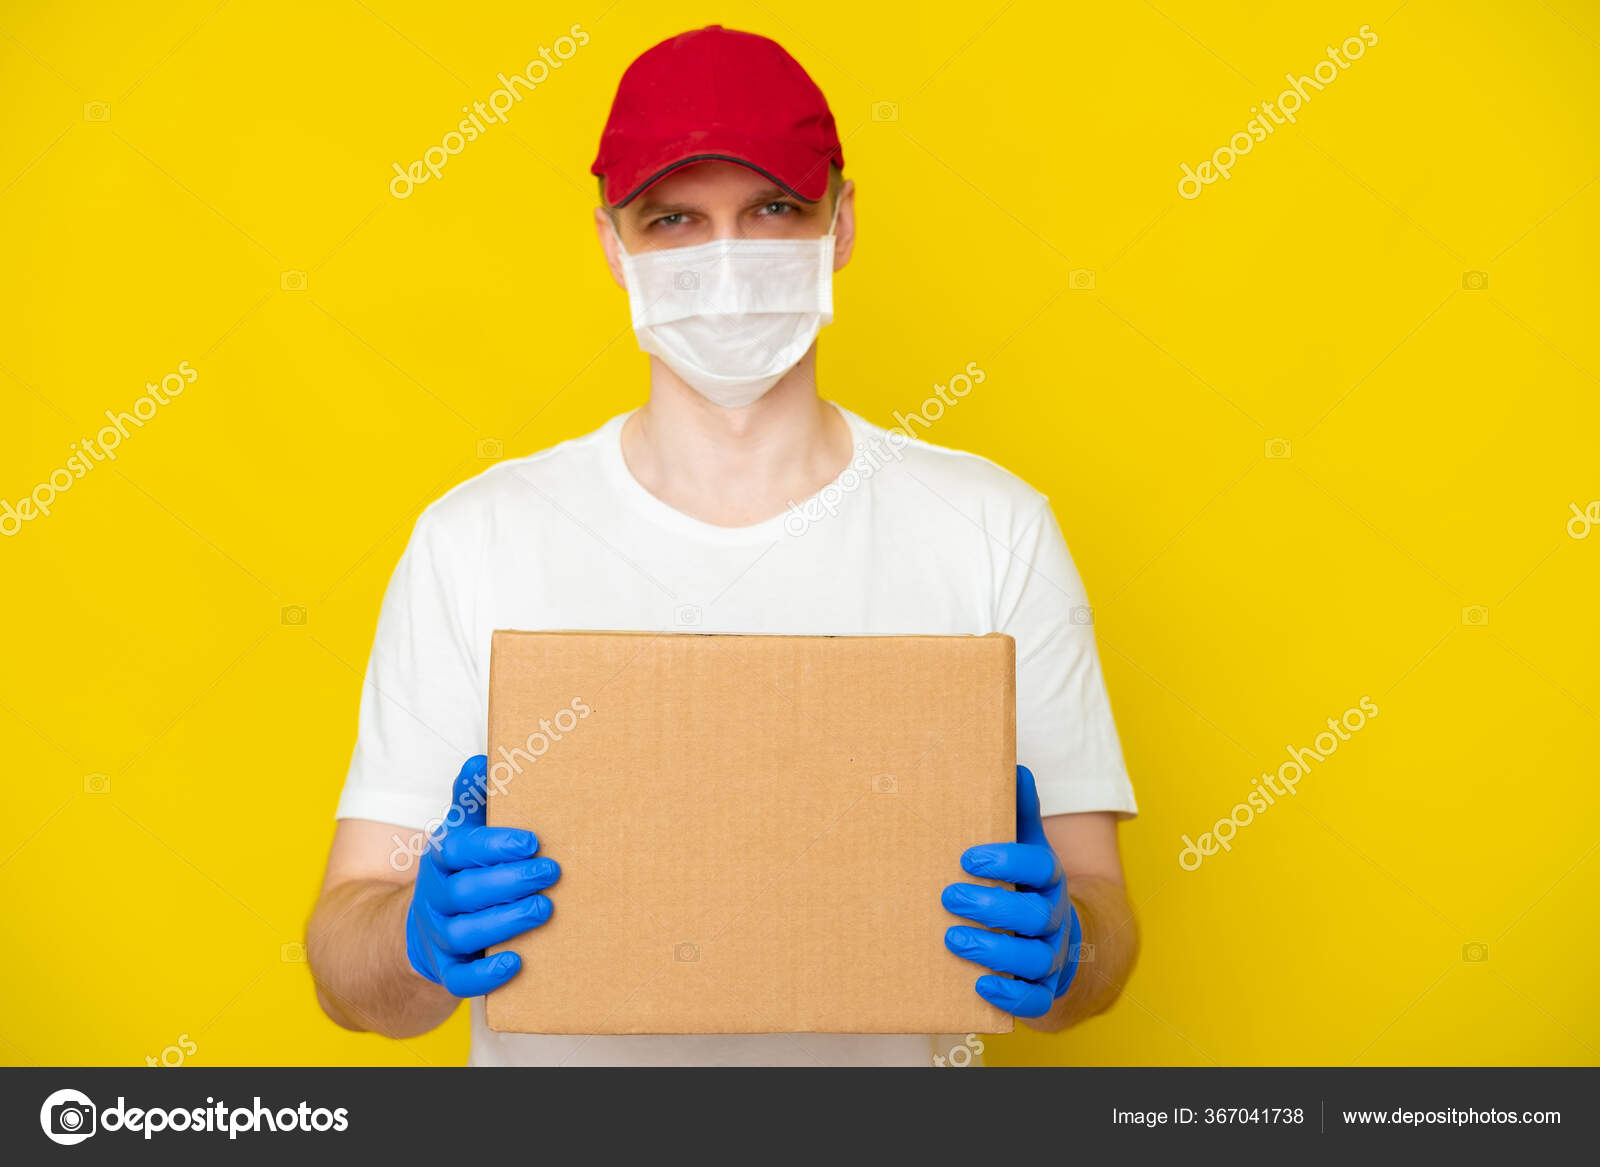 Delivery Man in Yellow Uniform Medical Face Mask and Gloves Holds